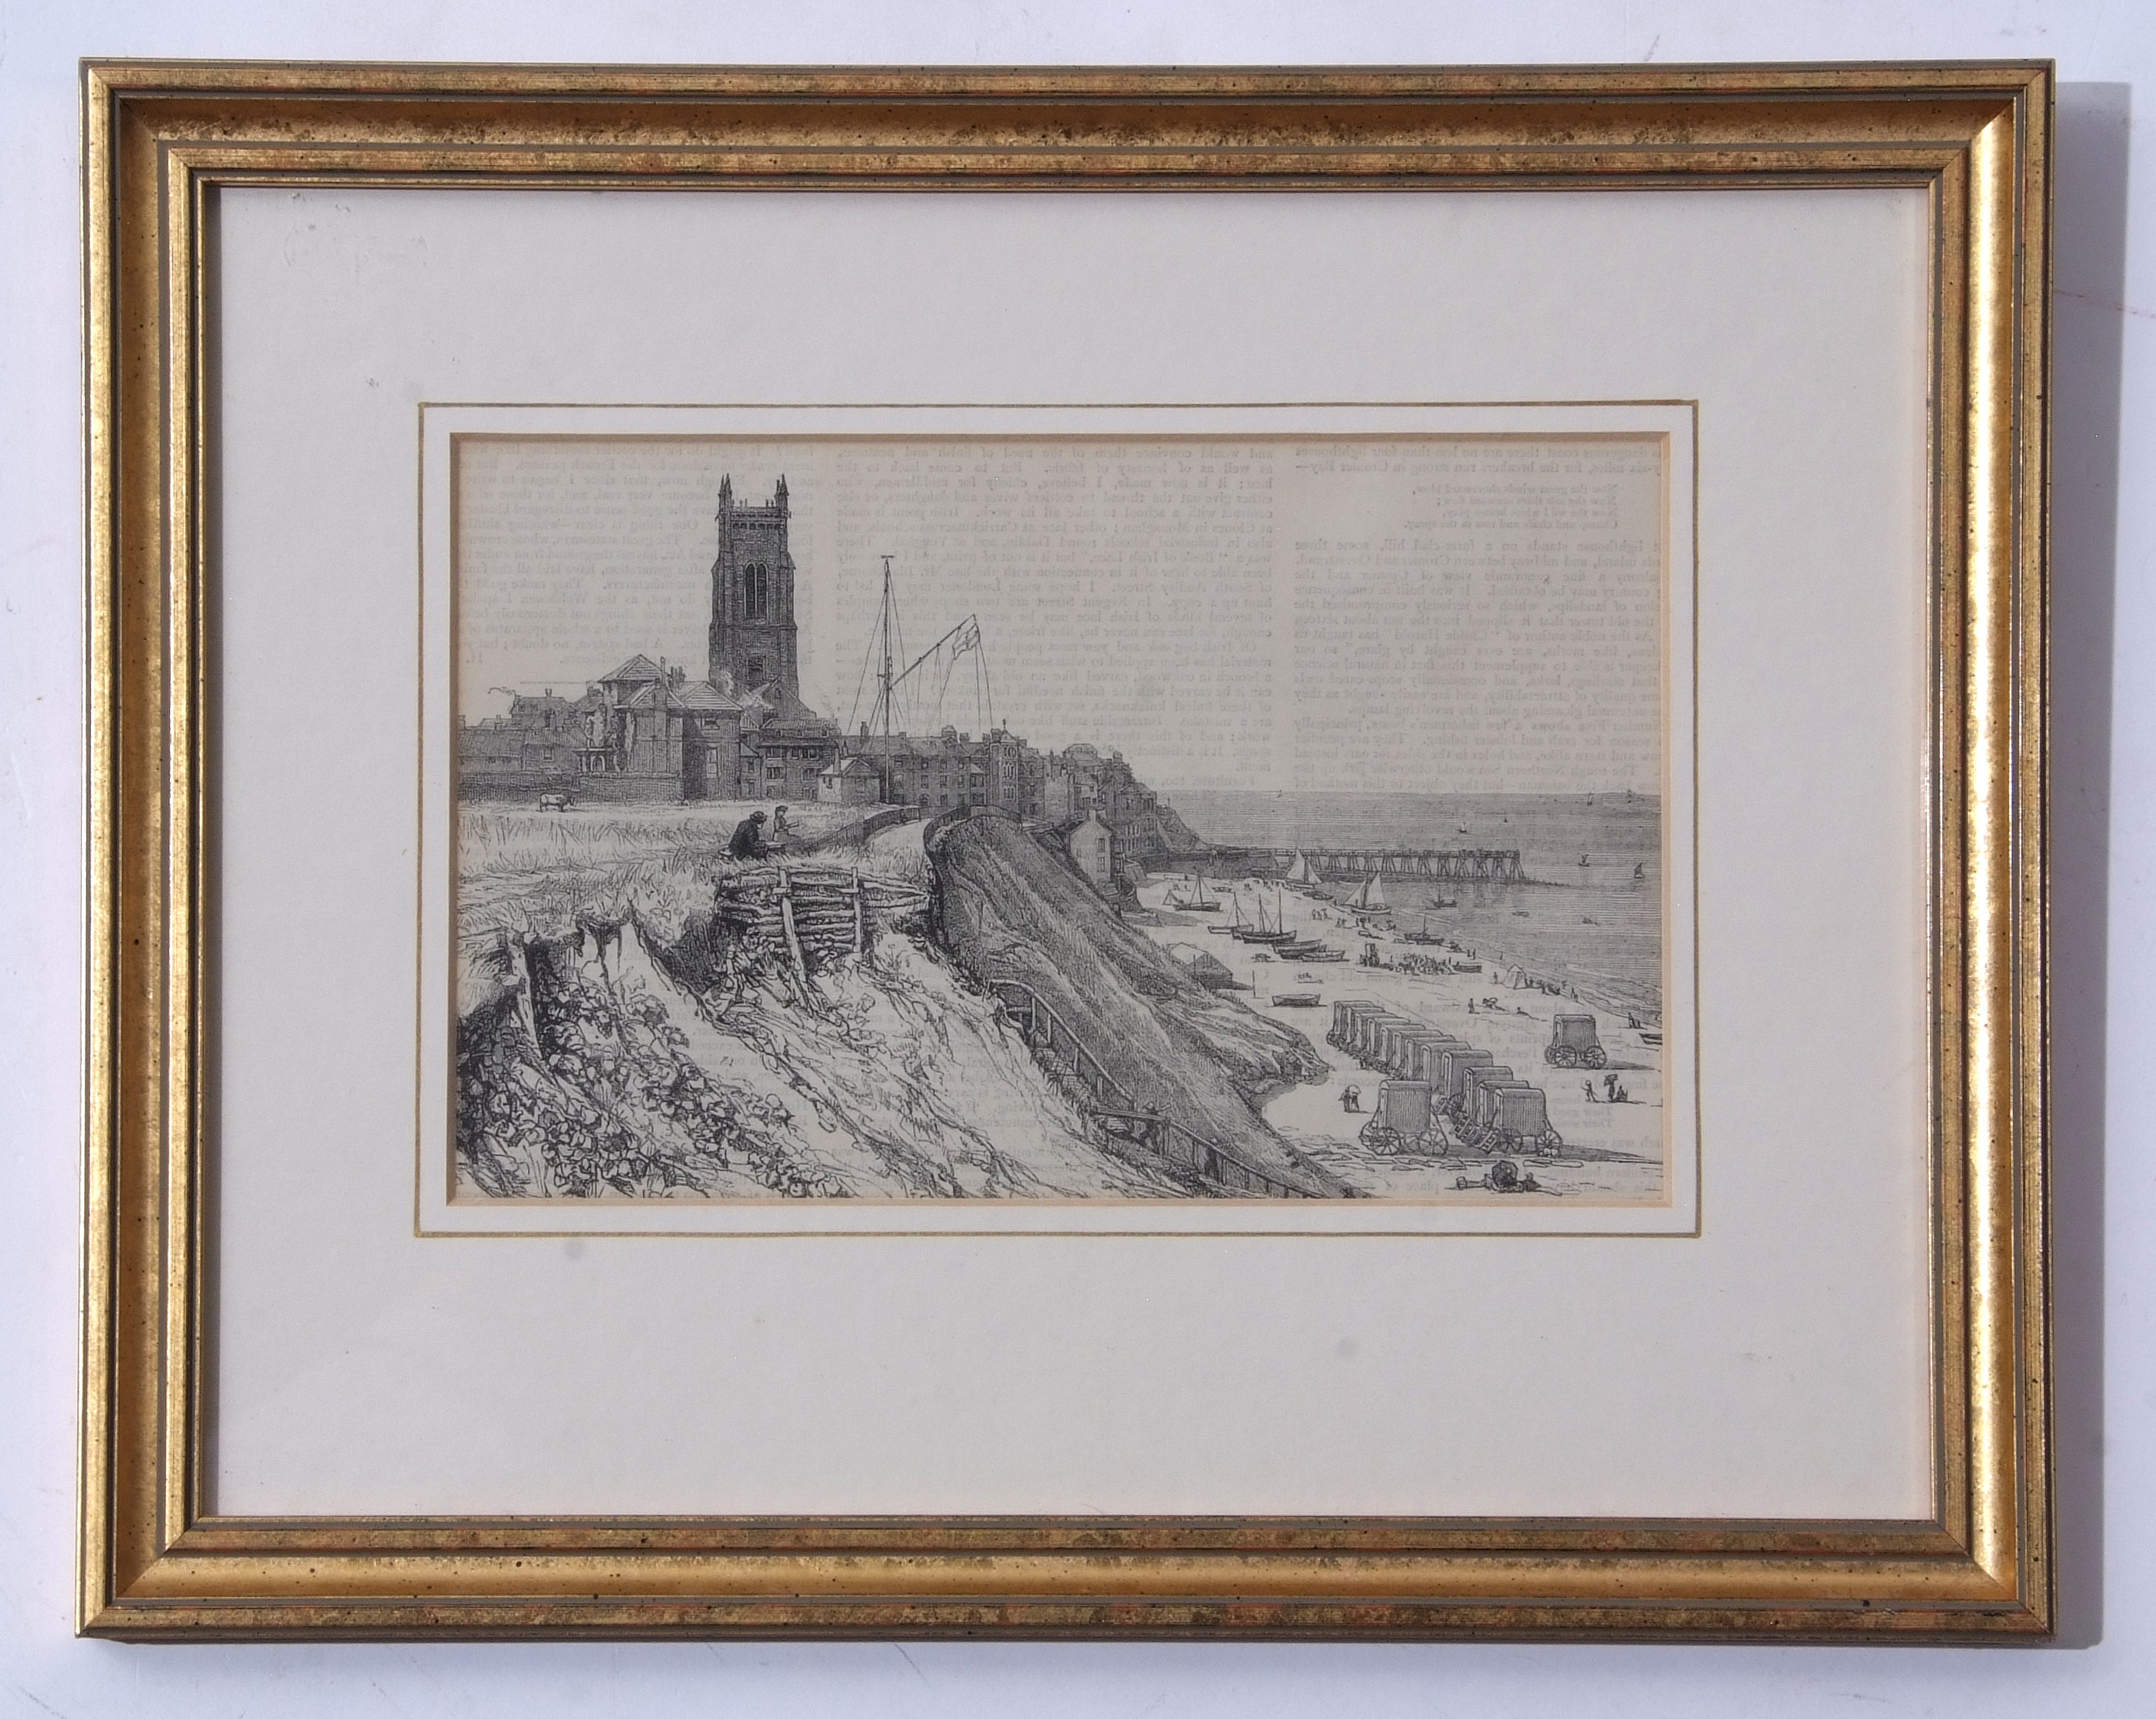 English School (19th century), "Cromer, 1823", black and white lithograph, 12 x 19cm, together